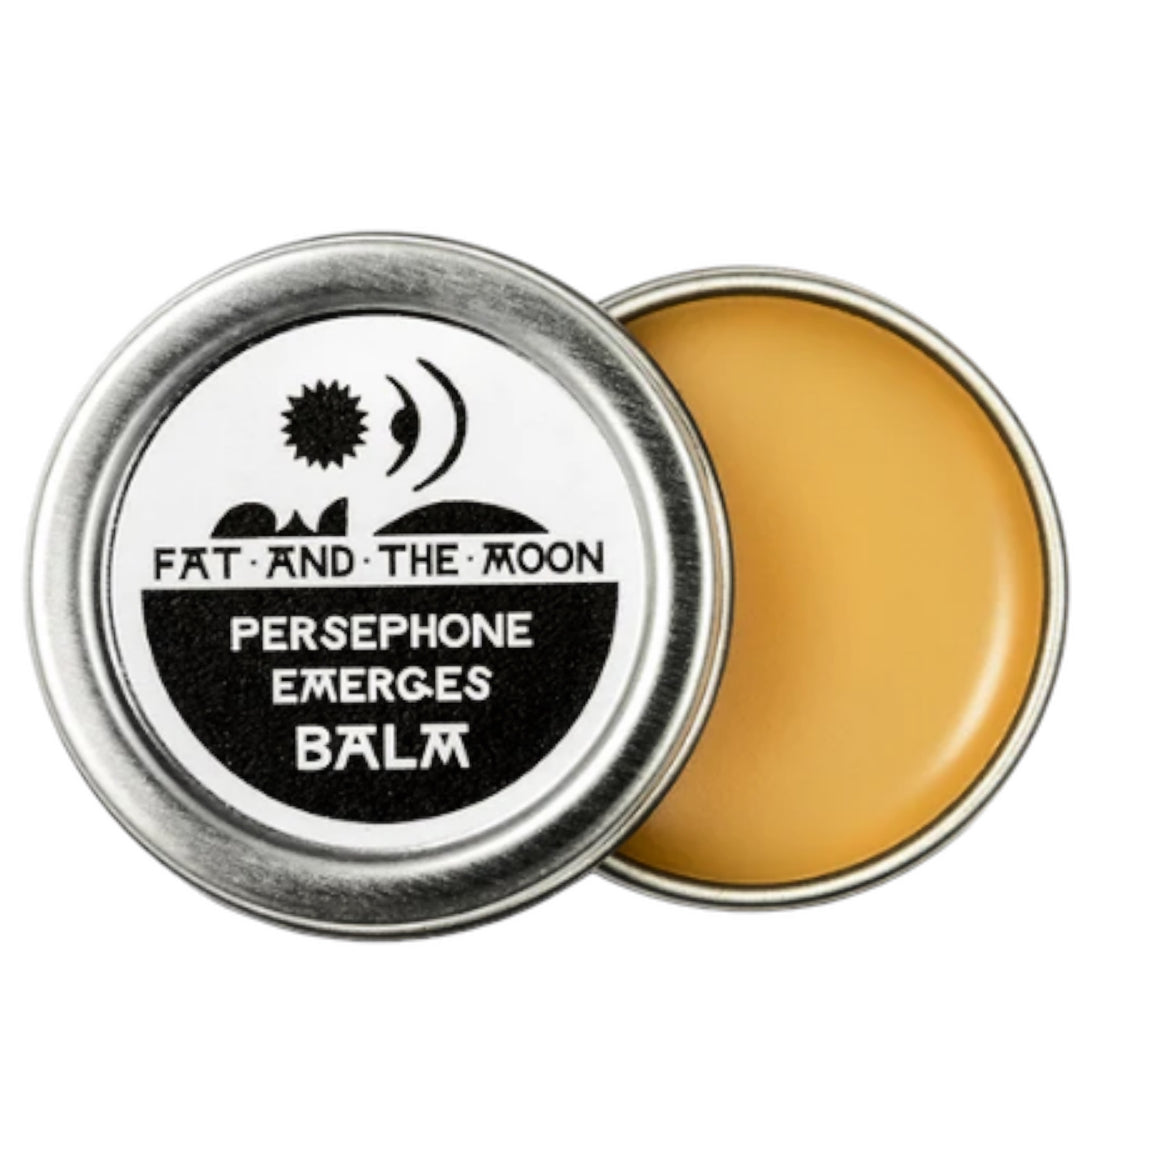 Persephone Emerges Scented Balm 0.5oz - Fat & The Moon